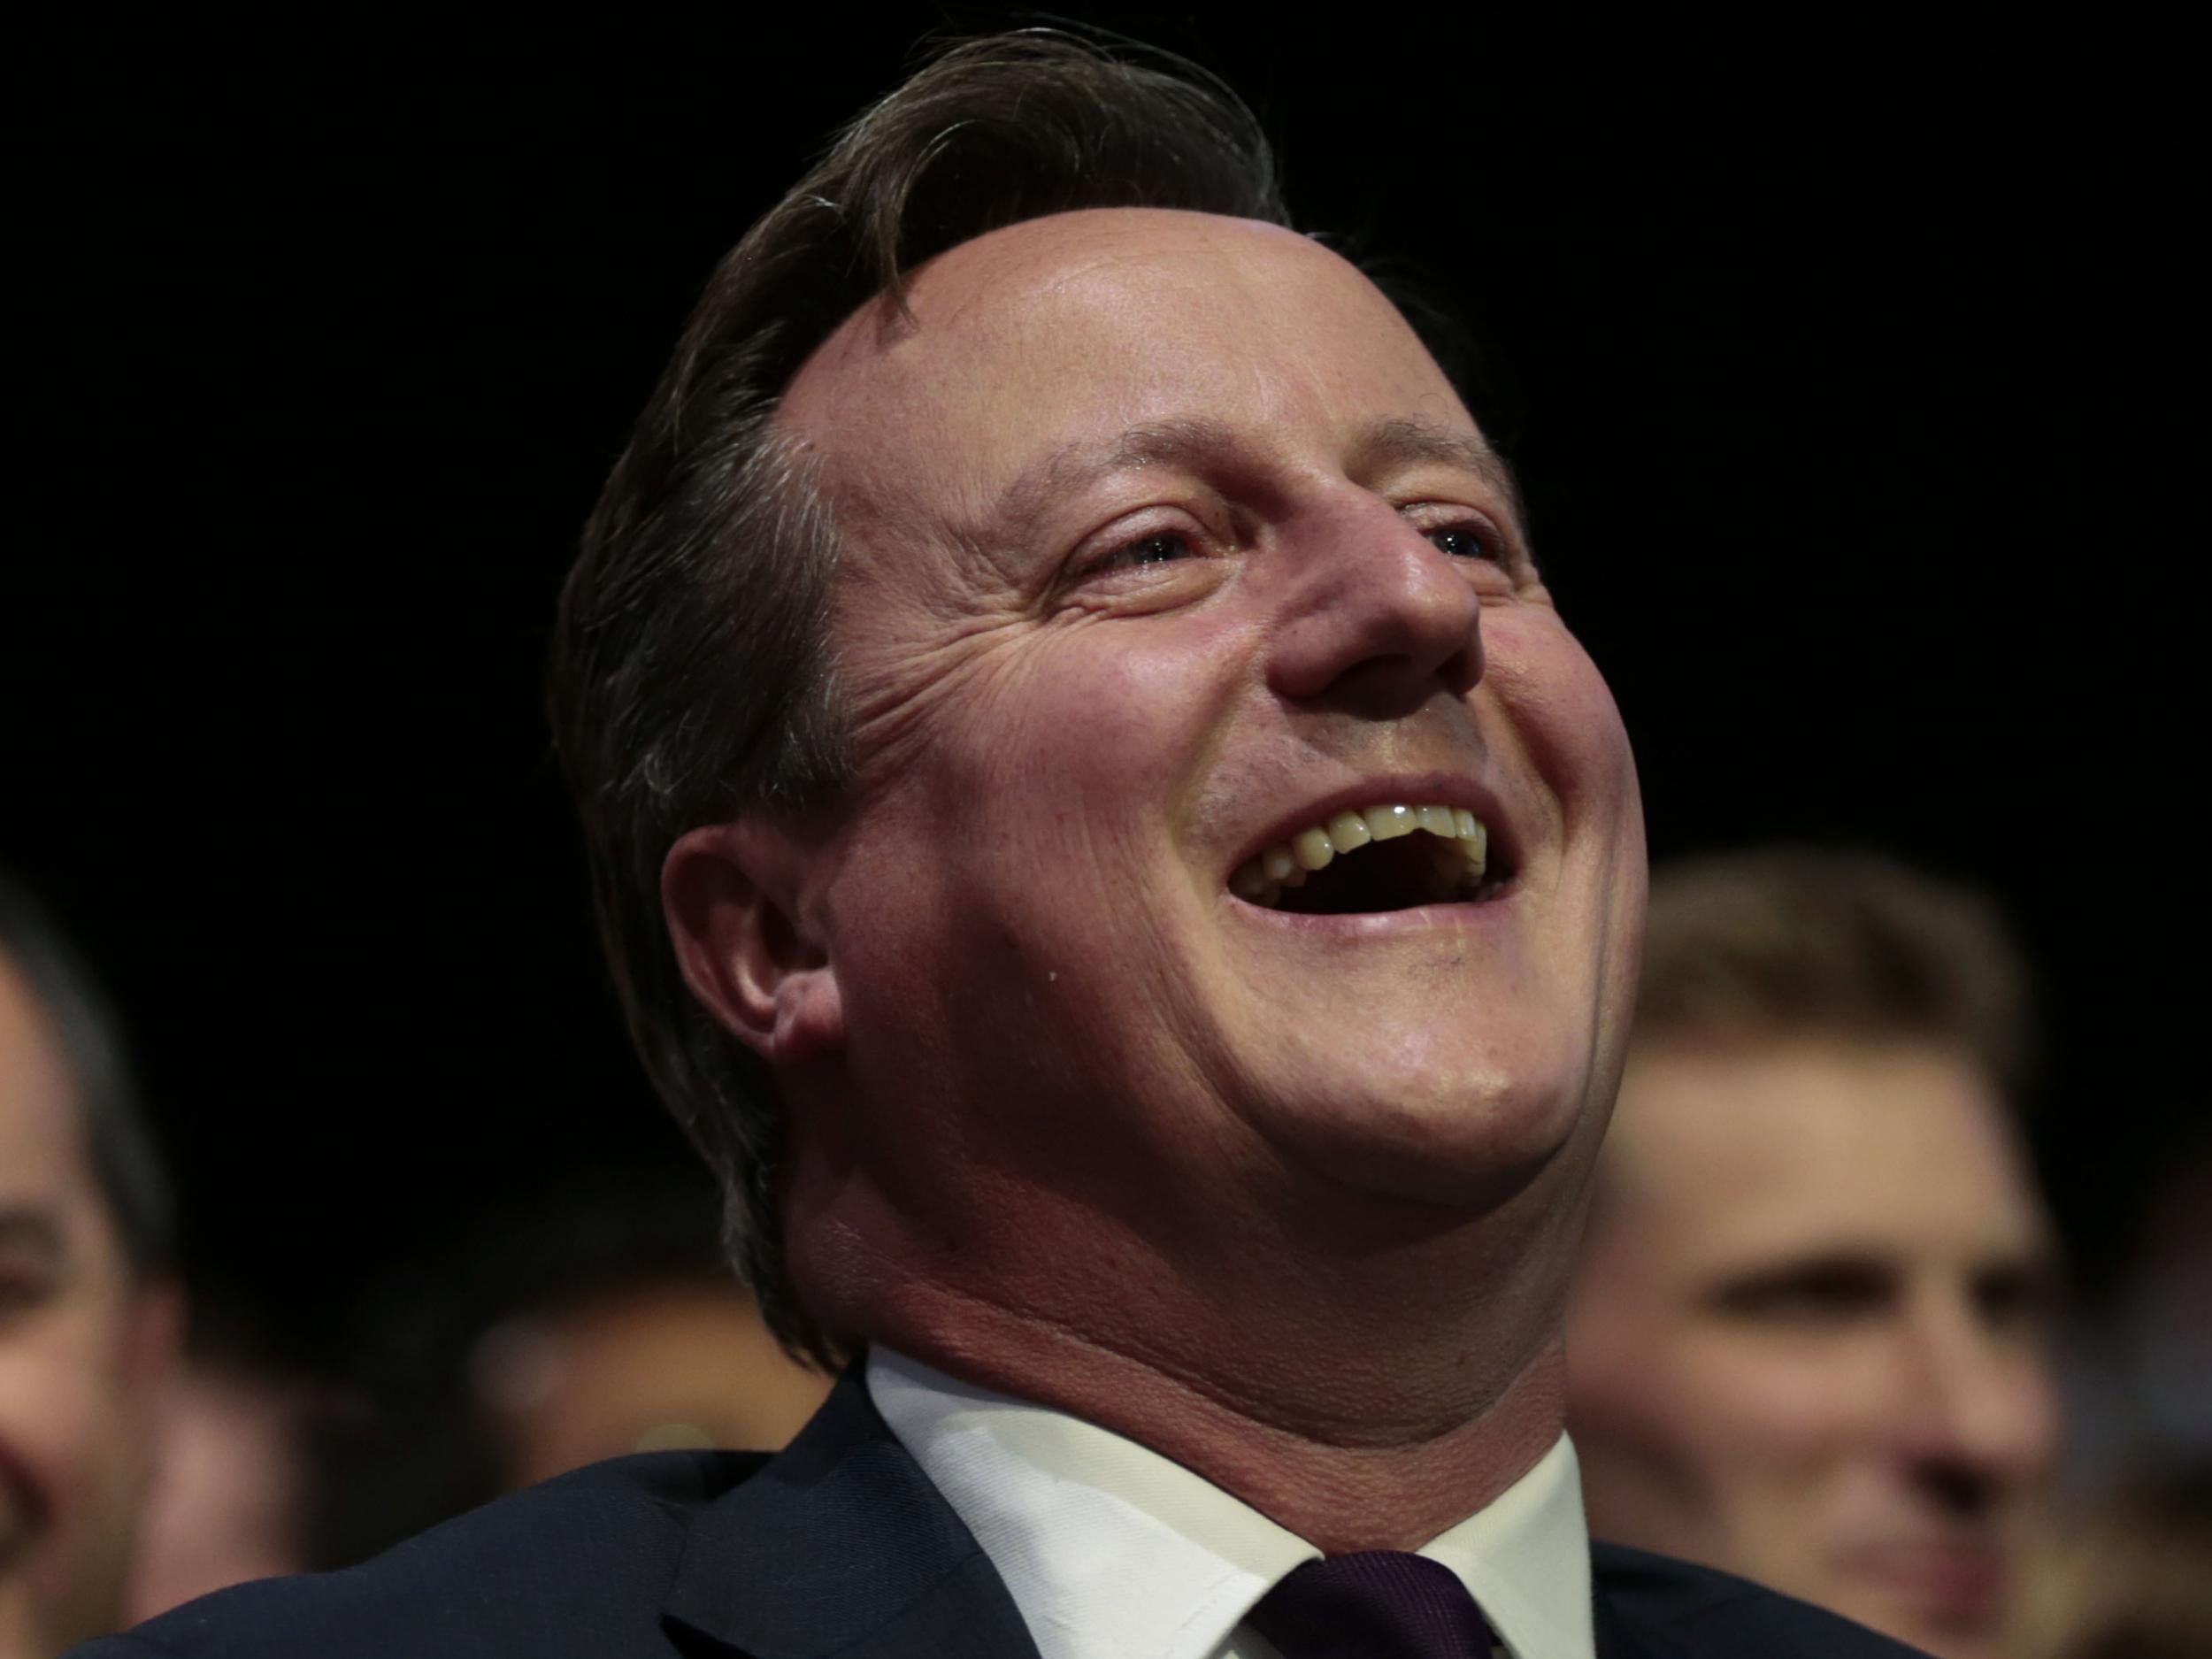 Cameron was once asked why he wanted to be prime minister and replied: “Because I think I’d be rather good at it.”